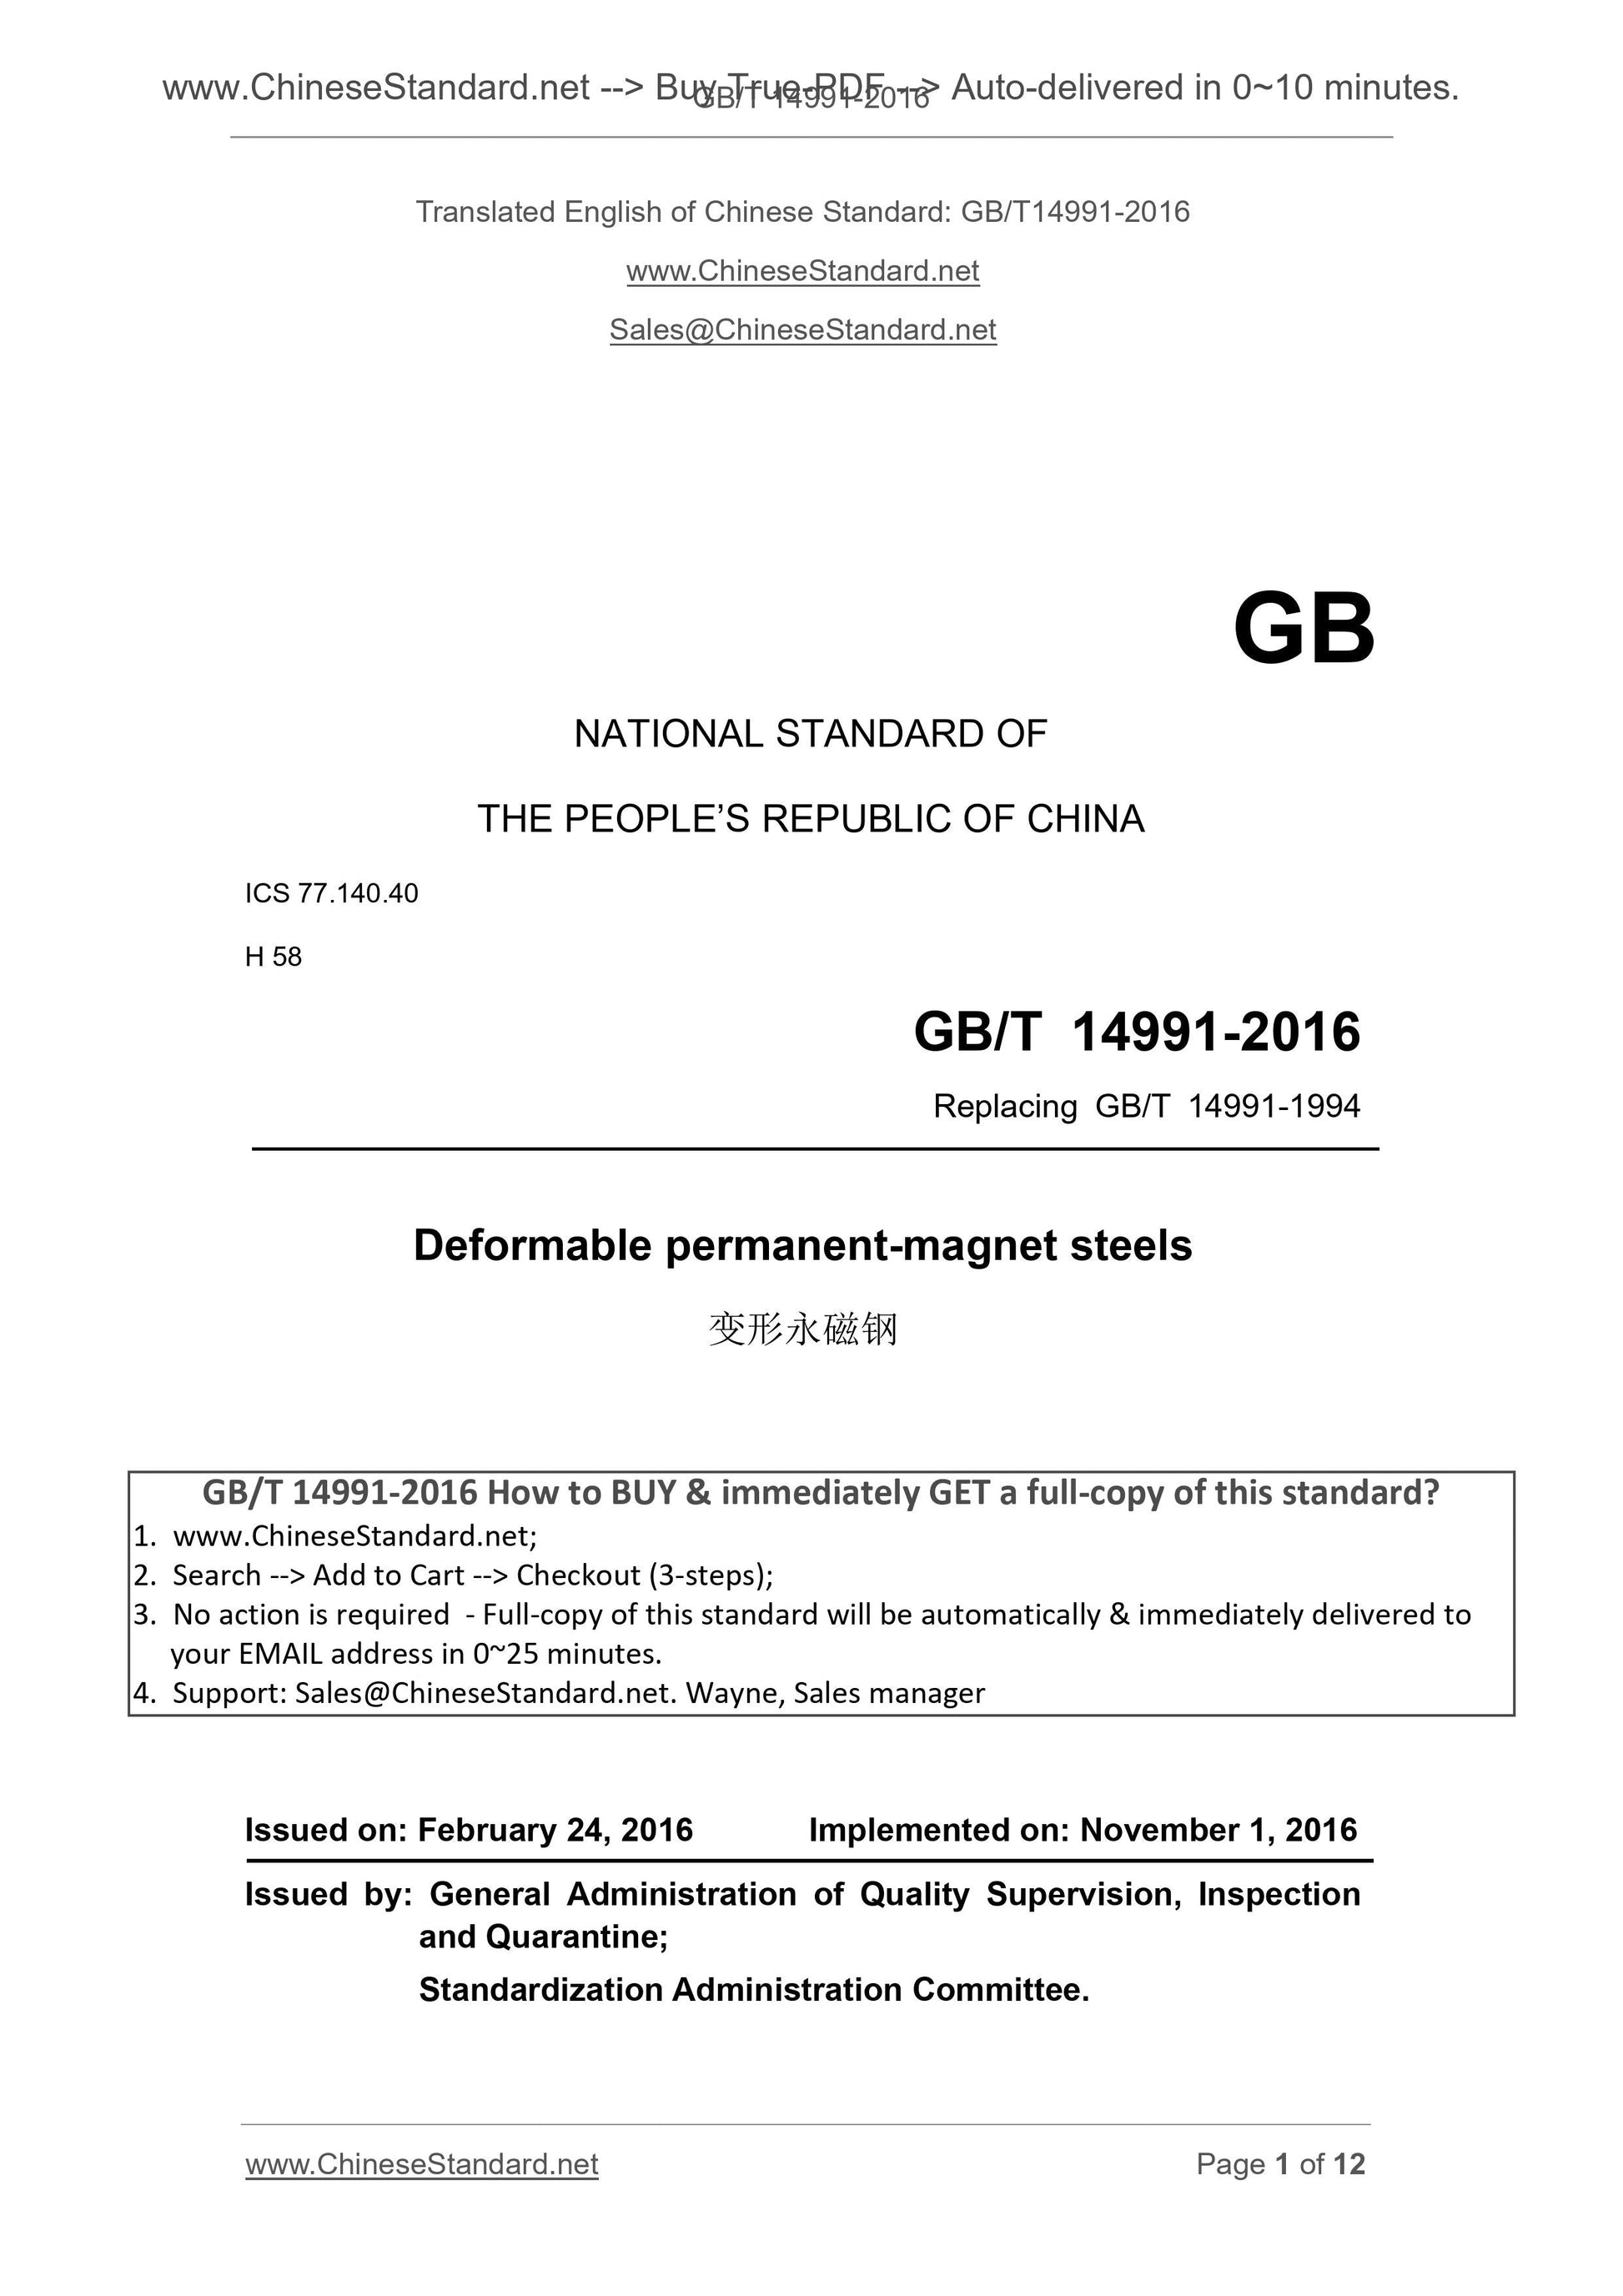 GB/T 14991-2016 Page 1